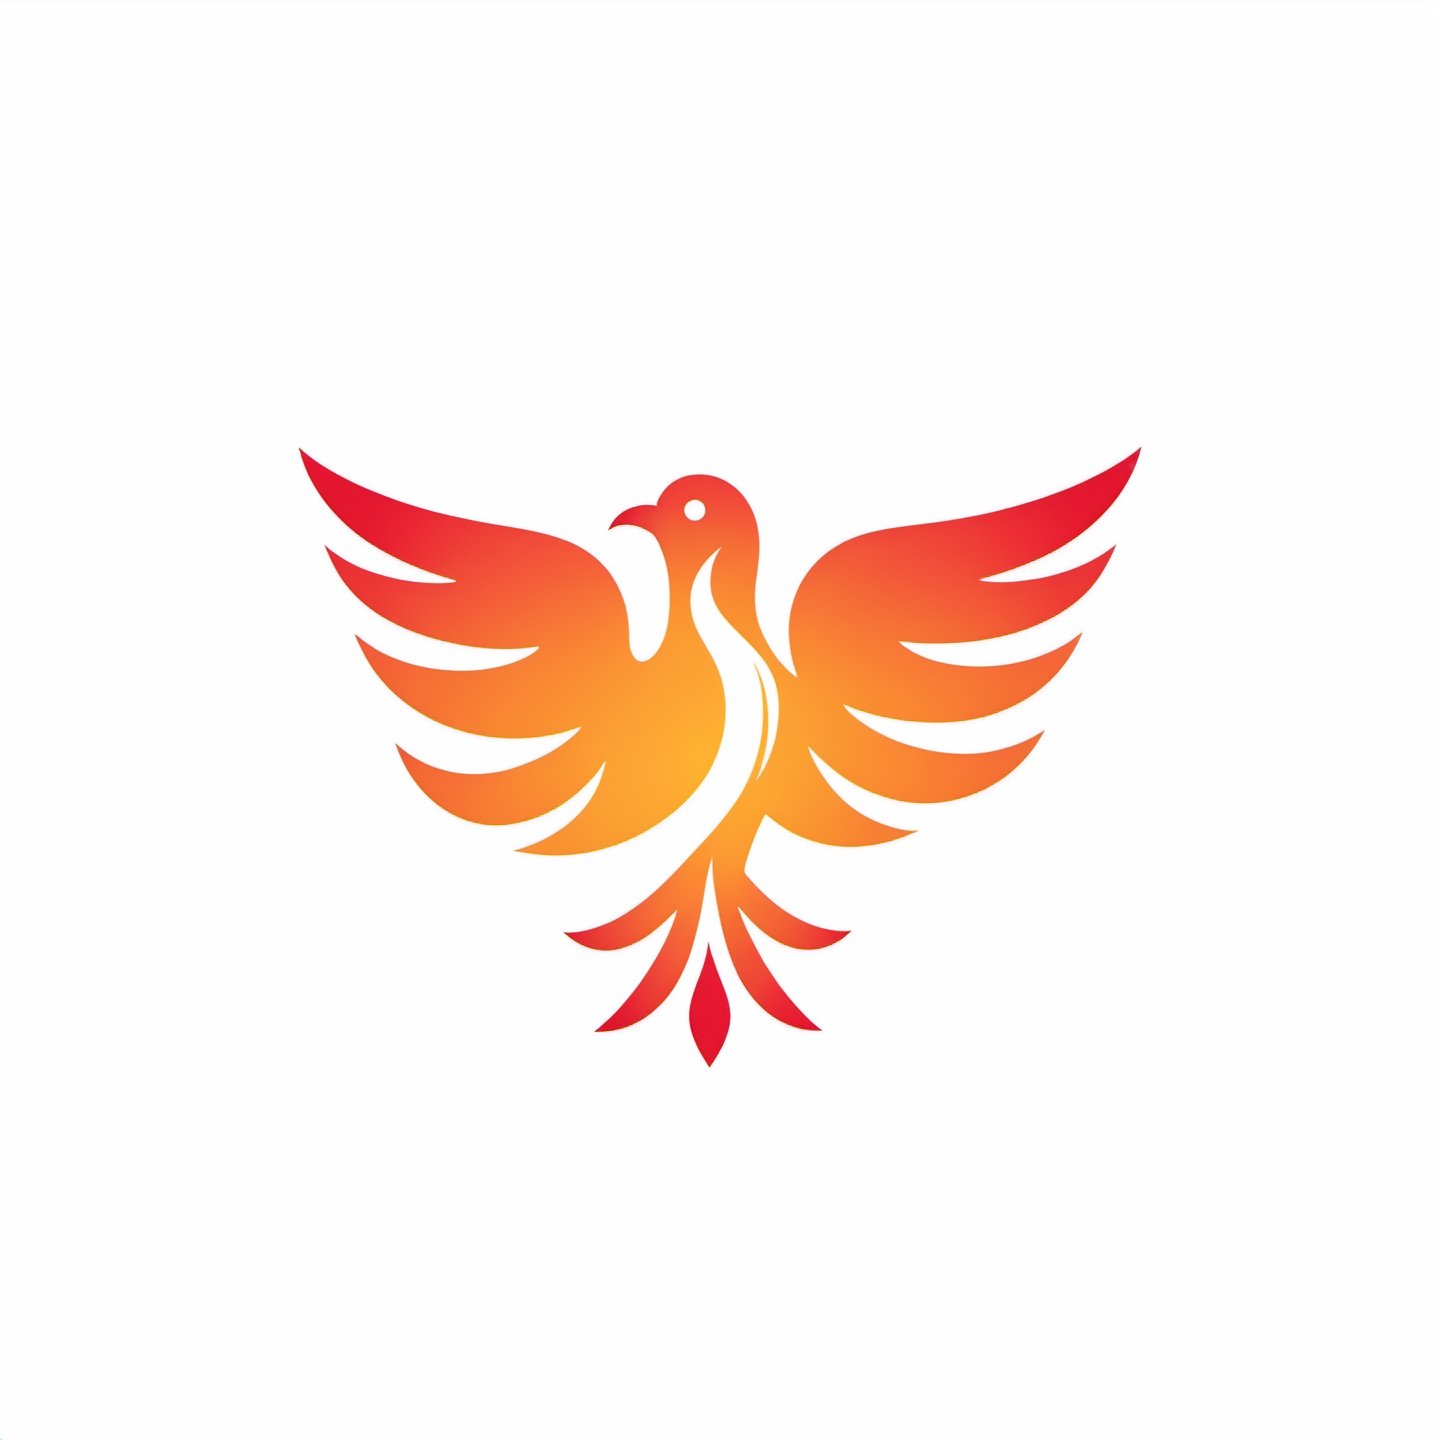 ((vector illustration, flat design)), (((logo phoenix with open wing, fire:1.2, facing right:1.4))), simple design elements, (((red & orange:1.4))), white background, high quality, ultra-detailed, professional, modern style, eye-catching emblem, creative composition, sharp lines and shapes, stylish and clean, appealing to the eye, striking visual impact, playful and dynamic, crisp and vibrant colors, vivid color scheme, attractive contrast, bold and minimalistic, artistic flair, lively and energetic feel, catchy and memorable design, versatile and scalable graphics, modern and trendy aesthetic, fluid and smooth curves, professional and polished finish, artistic elegance, unique and original concept, vector art illustration